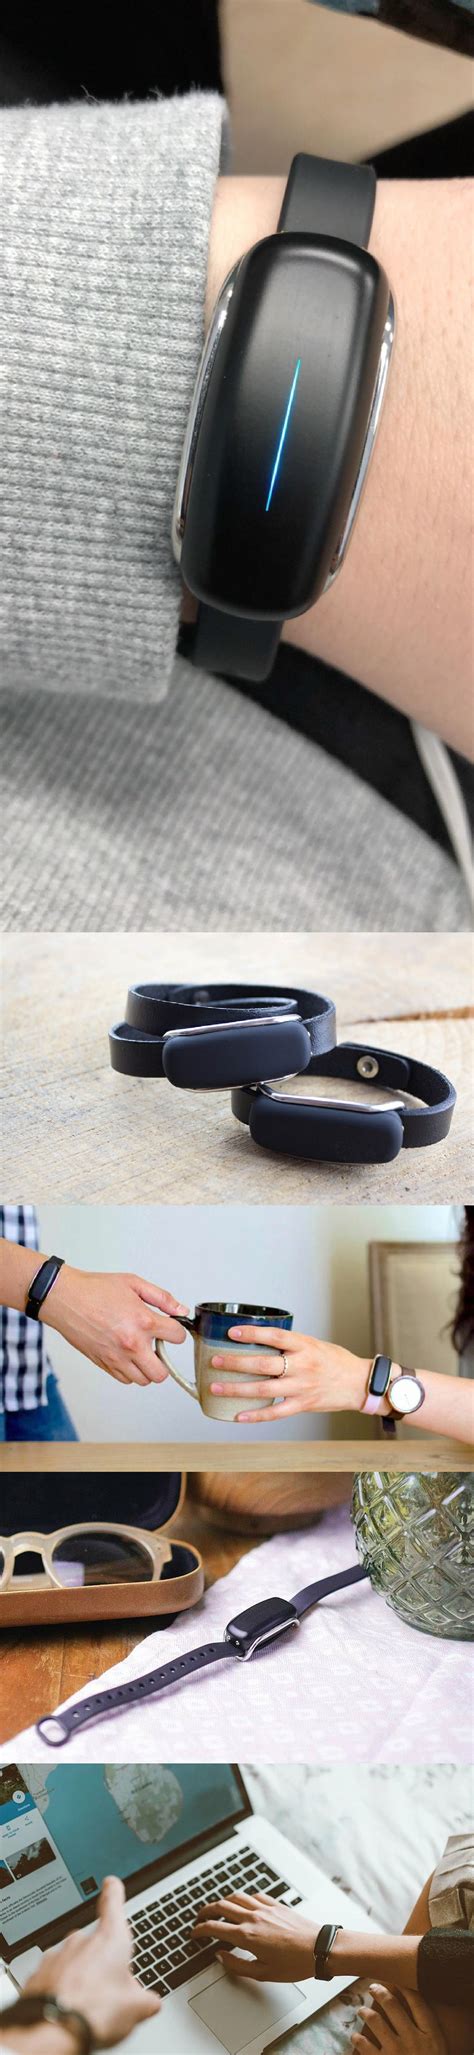 Looking for a good deal on bond touch bracelet? Stay more connected with your partner when wearing the ...